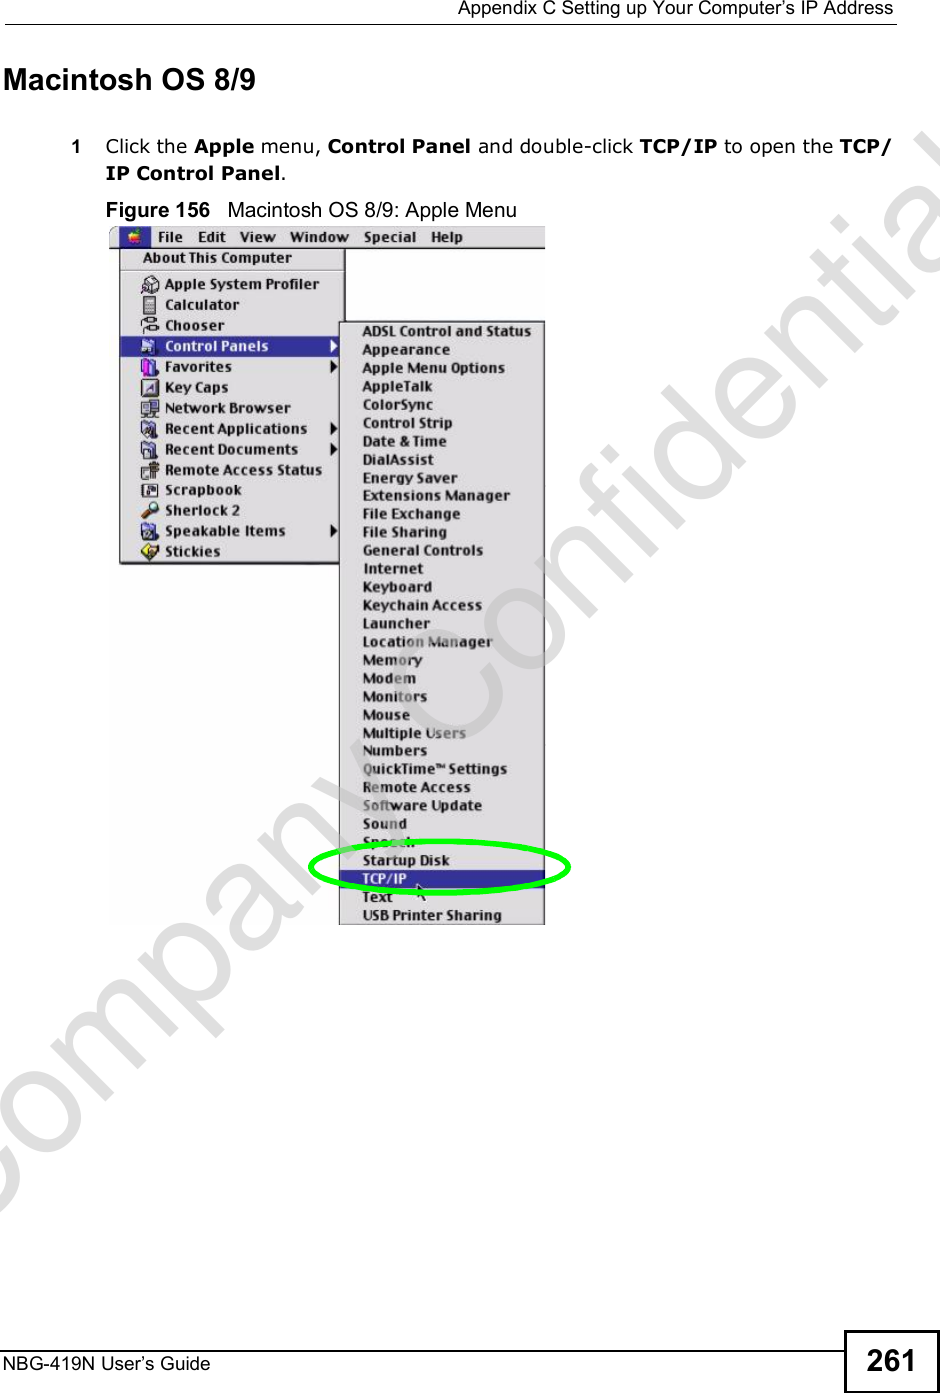  Appendix CSetting up Your Computer s IP AddressNBG-419N User s Guide 261Macintosh OS 8/9 1Click the Apple menu, Control Panel and double-click TCP/IP to open the TCP/IP Control Panel.Figure 156   Macintosh OS 8/9: Apple MenuCompany Confidential